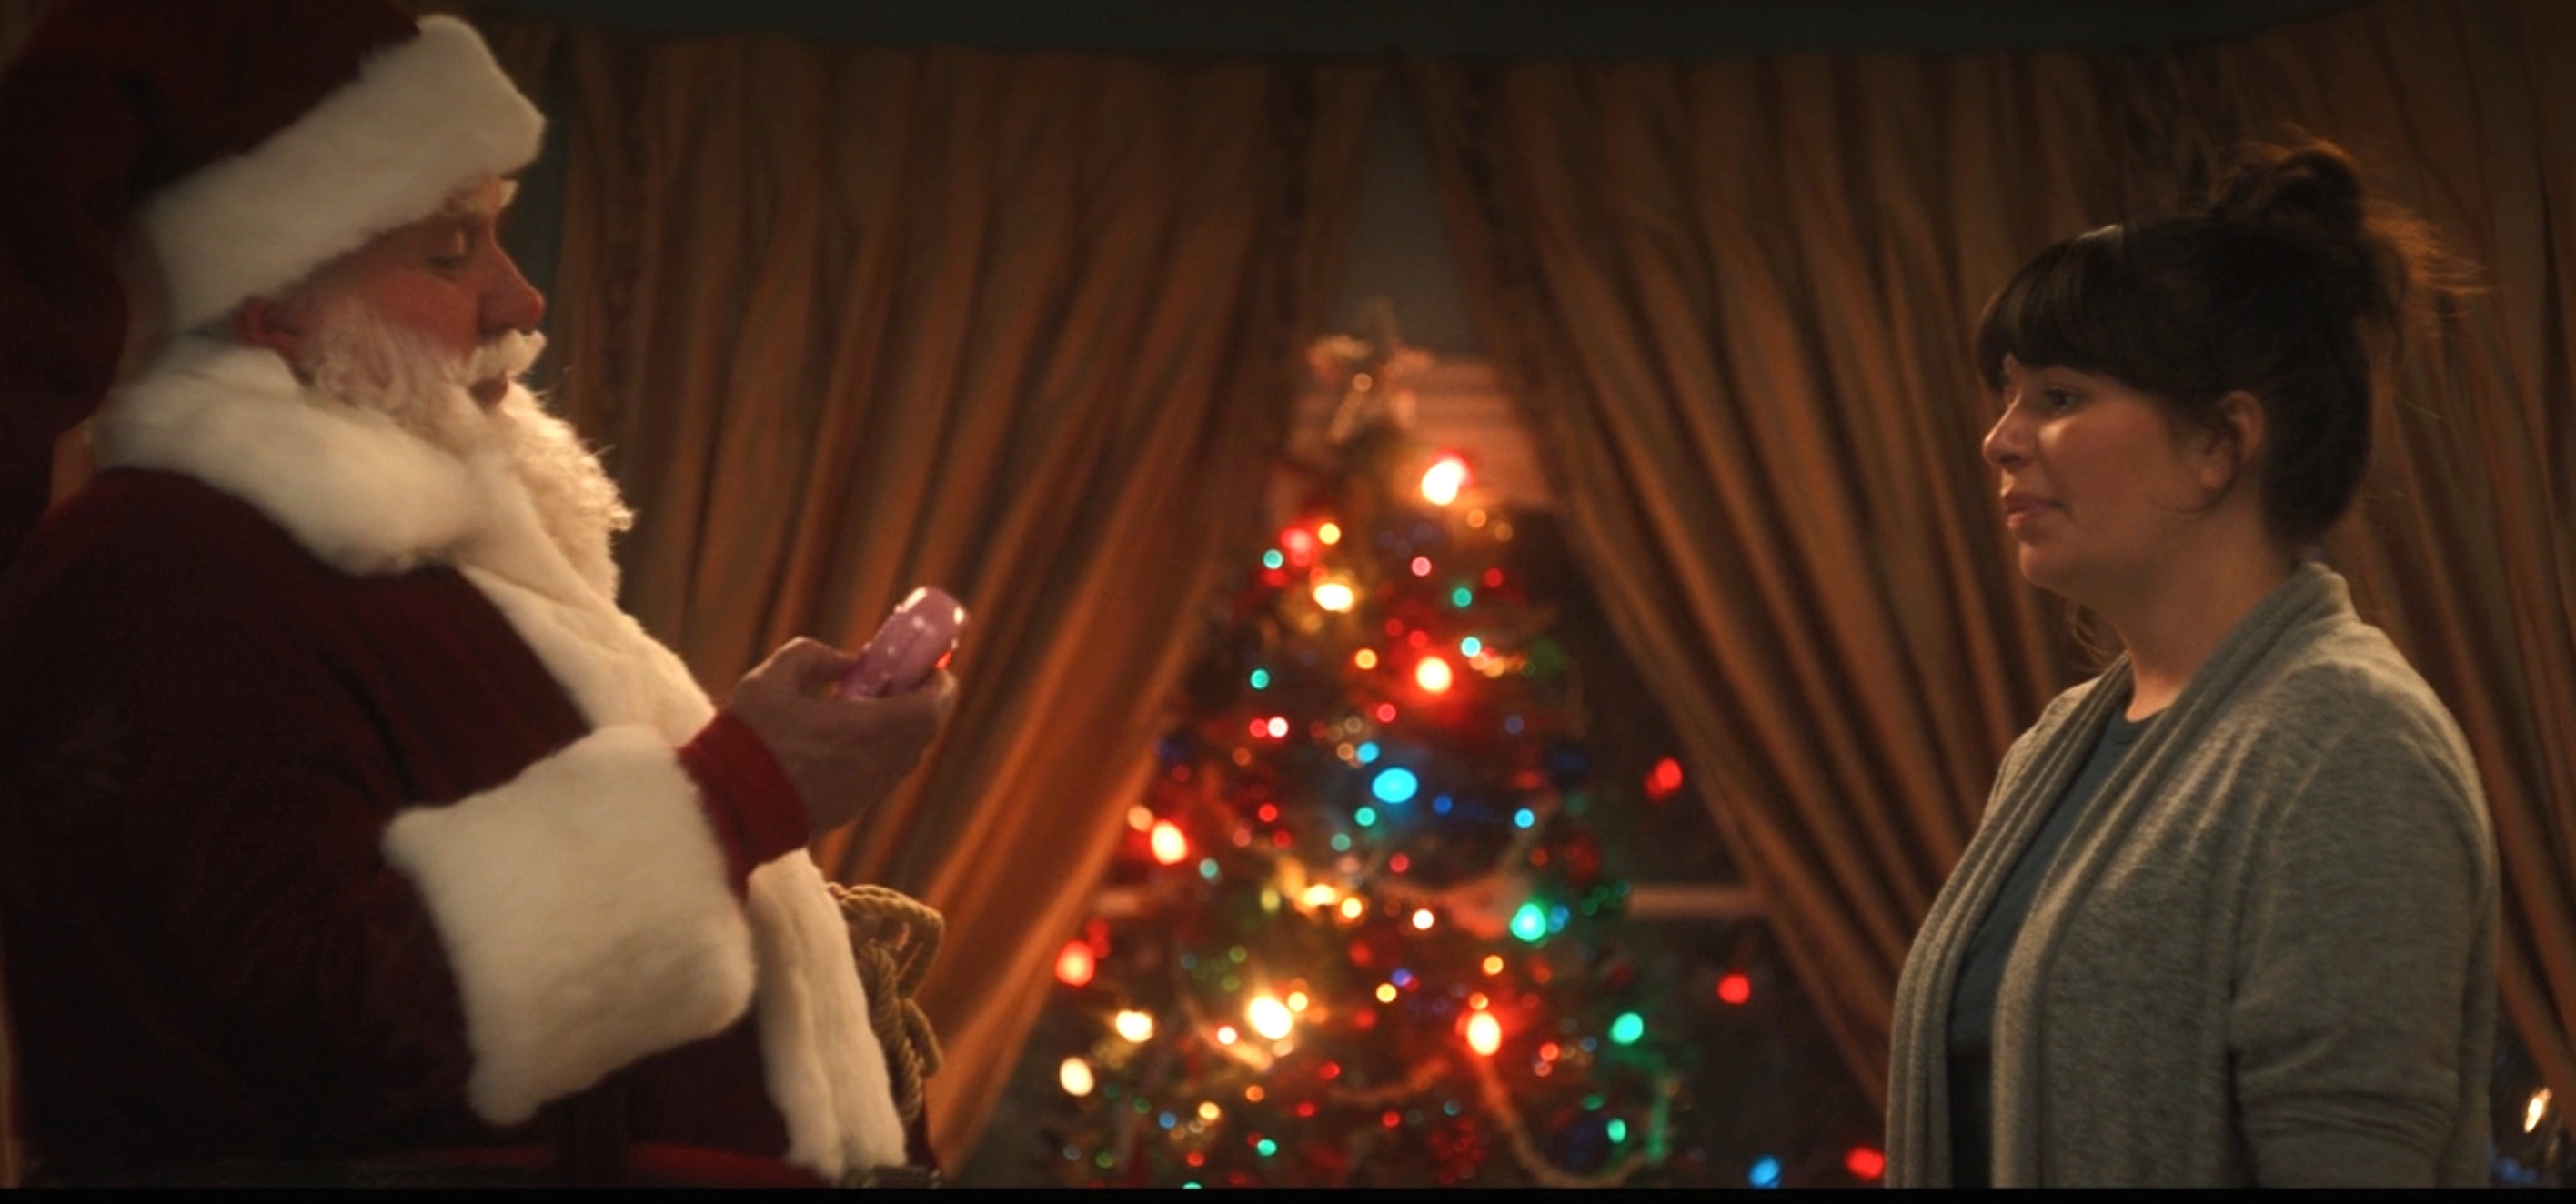 Santa Claus holds up a Polly Pocket toy while Casey&#x27;s character, in a cardigan, watches him. There is a decorated Christmas tree in the background